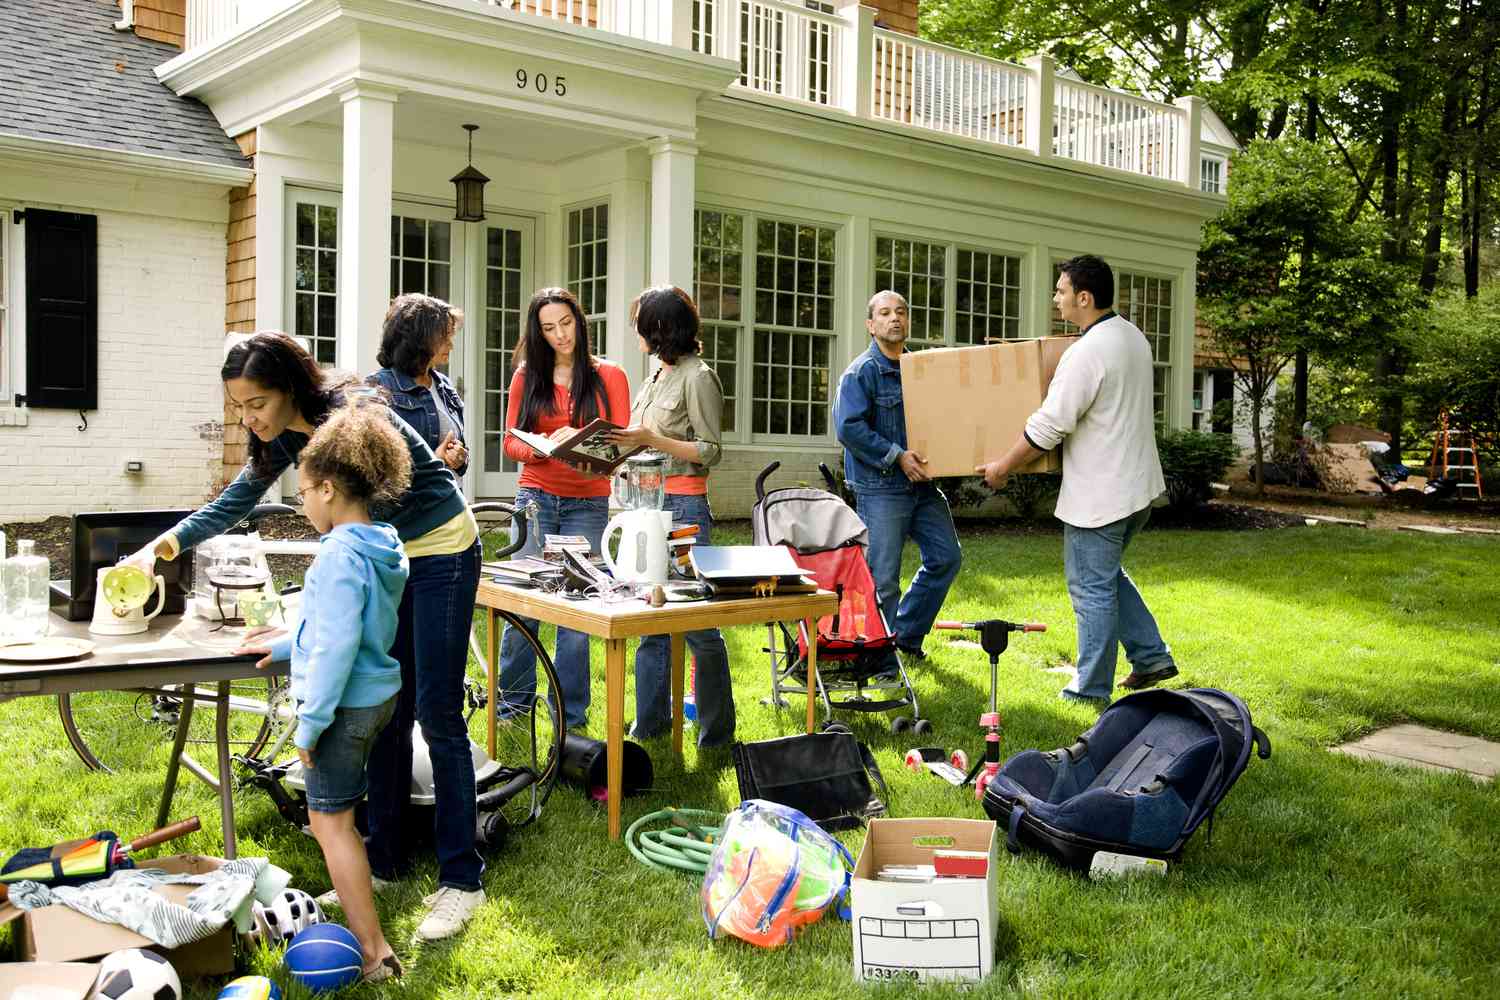 How to Buy an Estate Sale Home